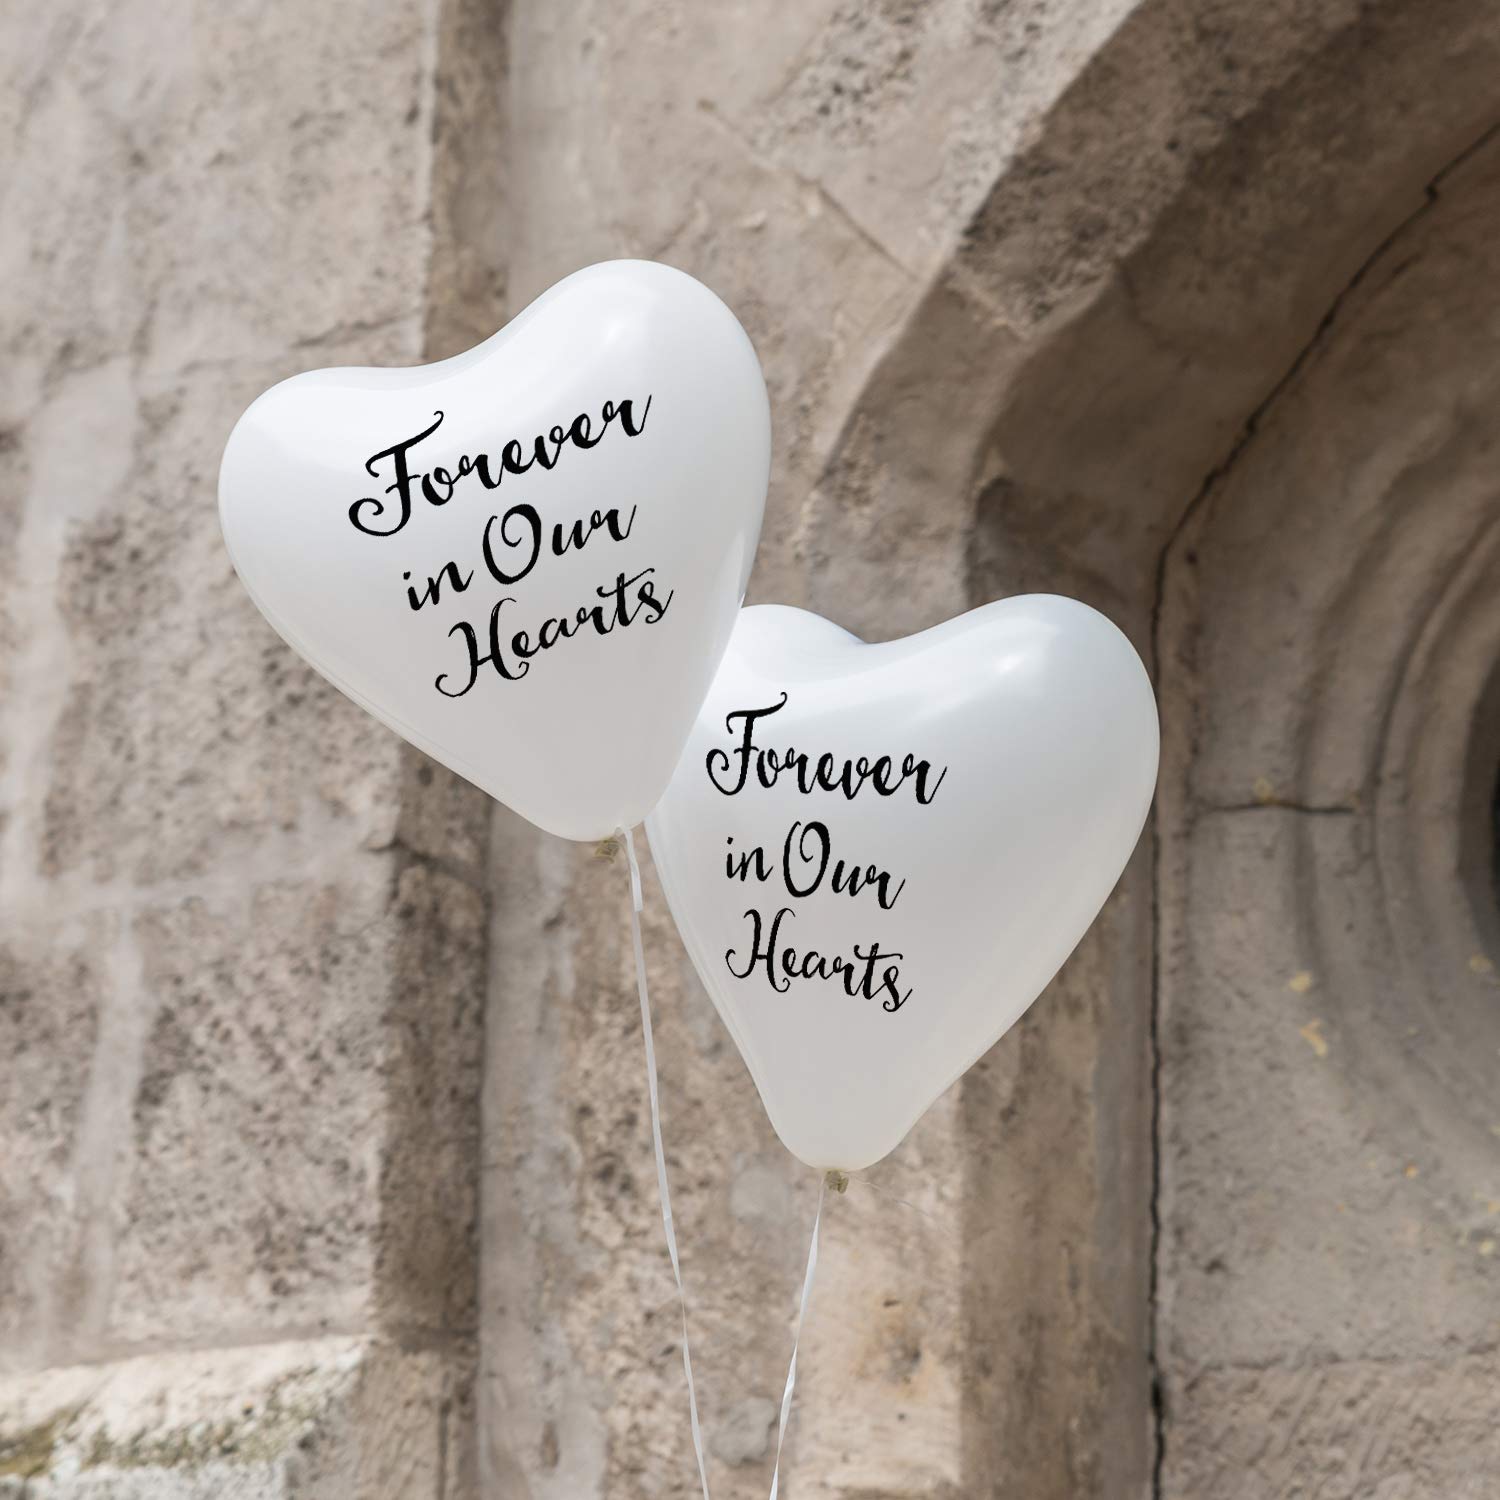 60 Pieces Funeral Balloon White Hearts Shape Balloons Memorial Balloons Latex Balloons with 2 Rolls White Balloon Ribbons for Funeral Memorial Decoration